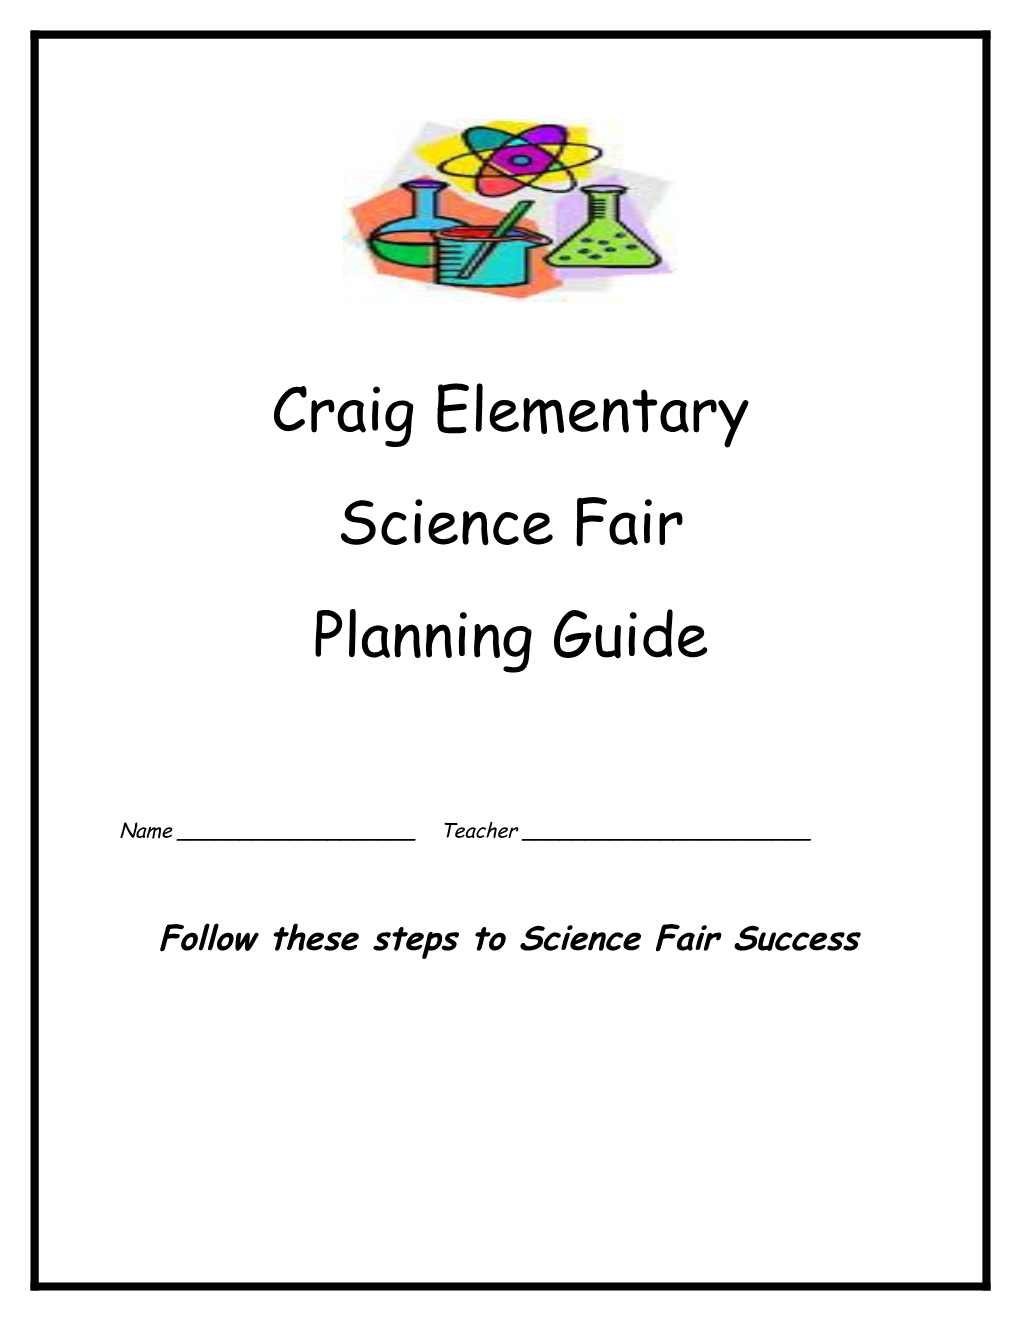 Follow These Steps to Science Fair Success